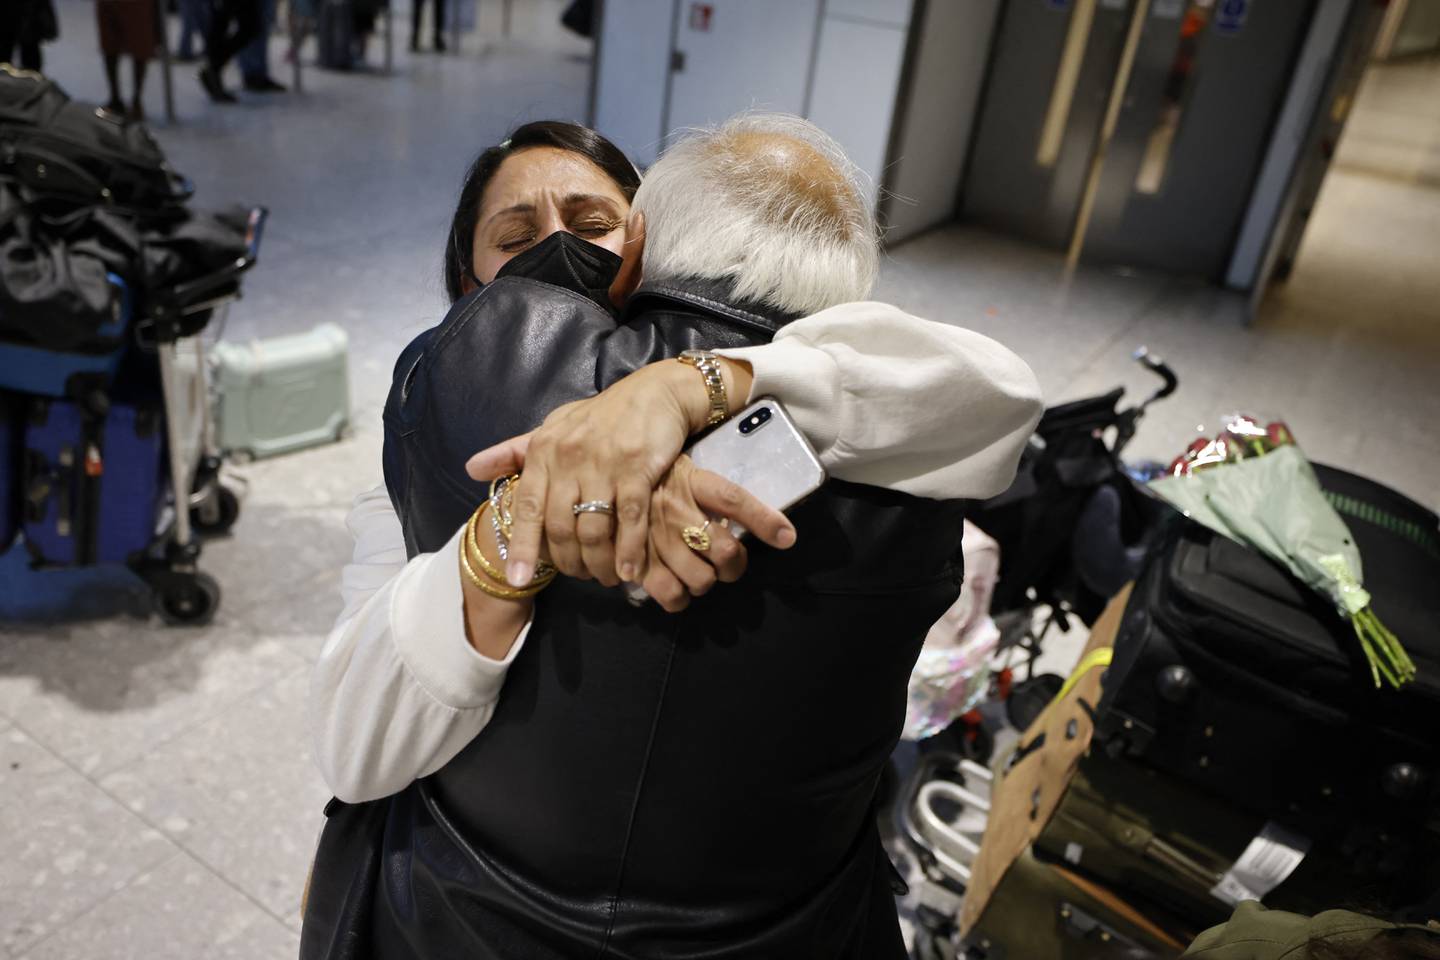 A man and woman embrace at the arrivals department of Heathrow Airport's Terminal 5. Photo: Tolga Akmen / AFP